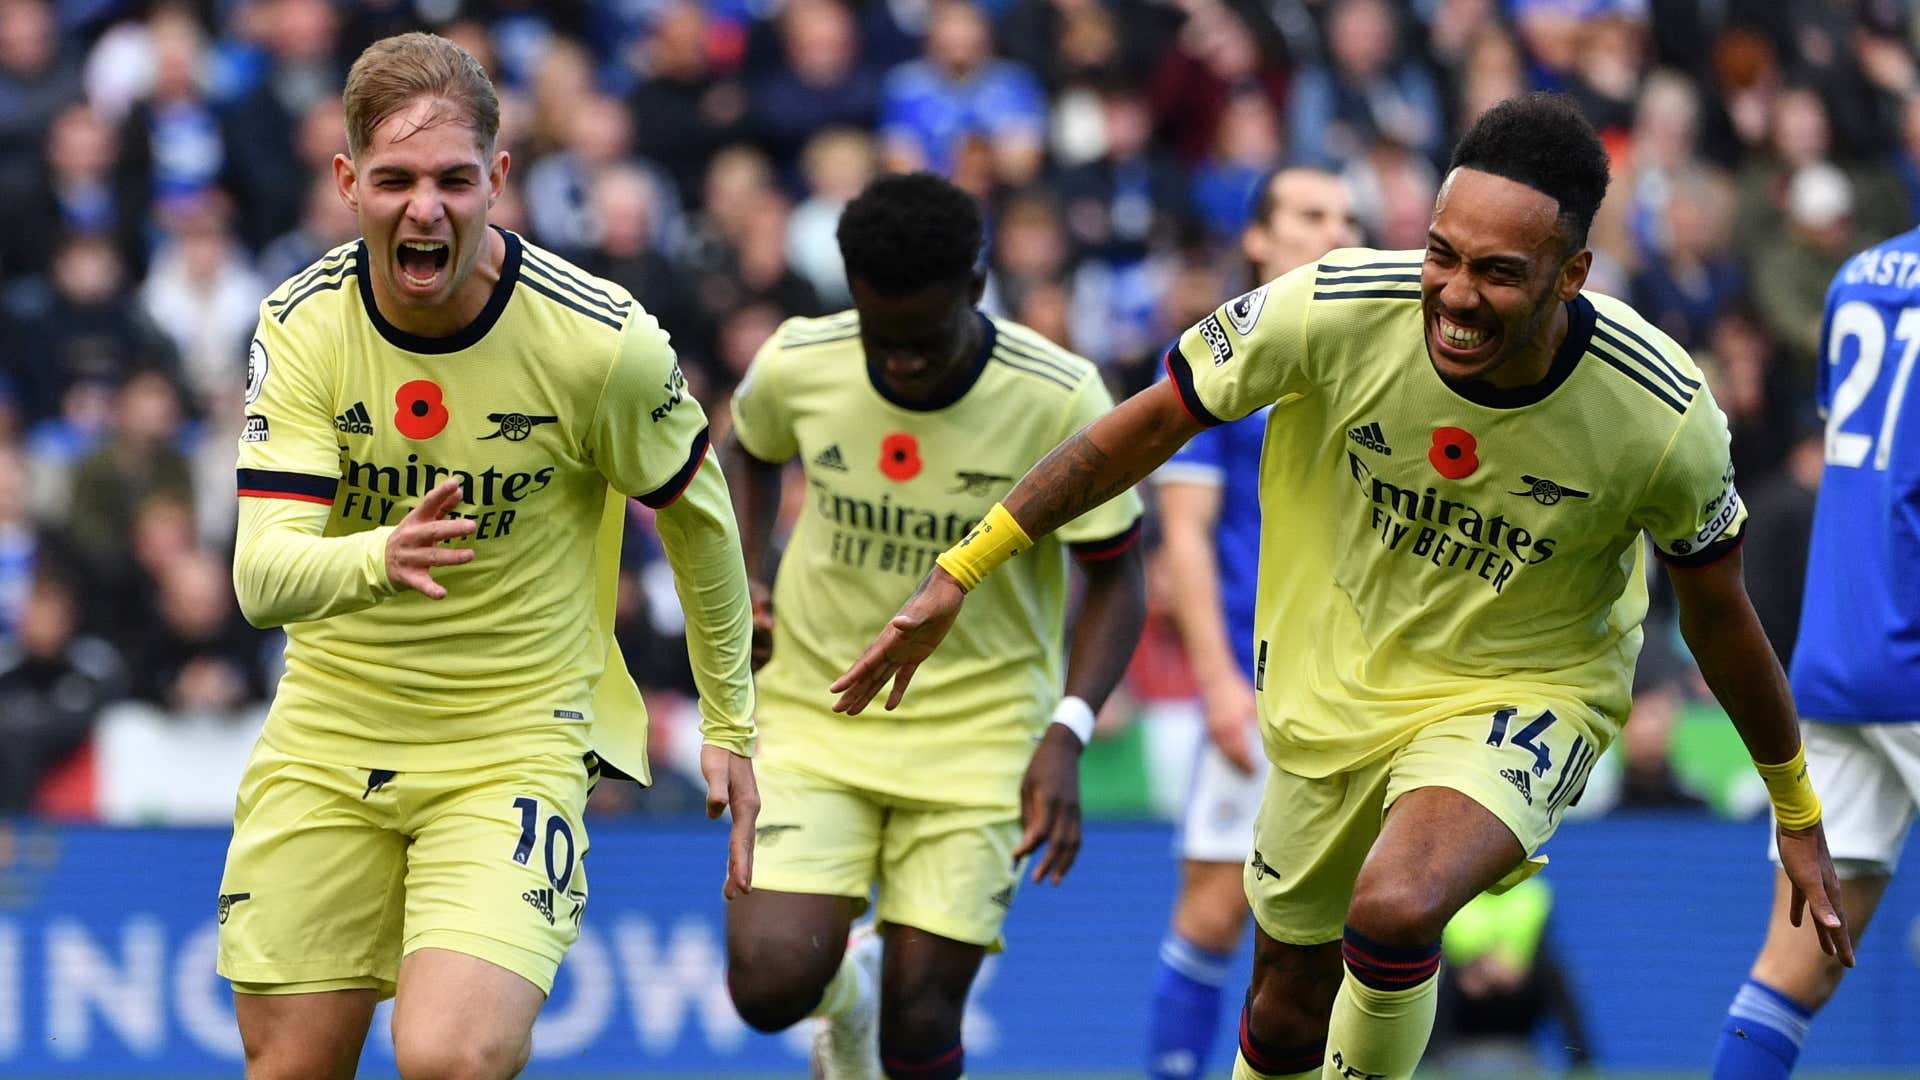 Arsenal celebrate Emile Smith Rowe goal at Leicester 2021-22